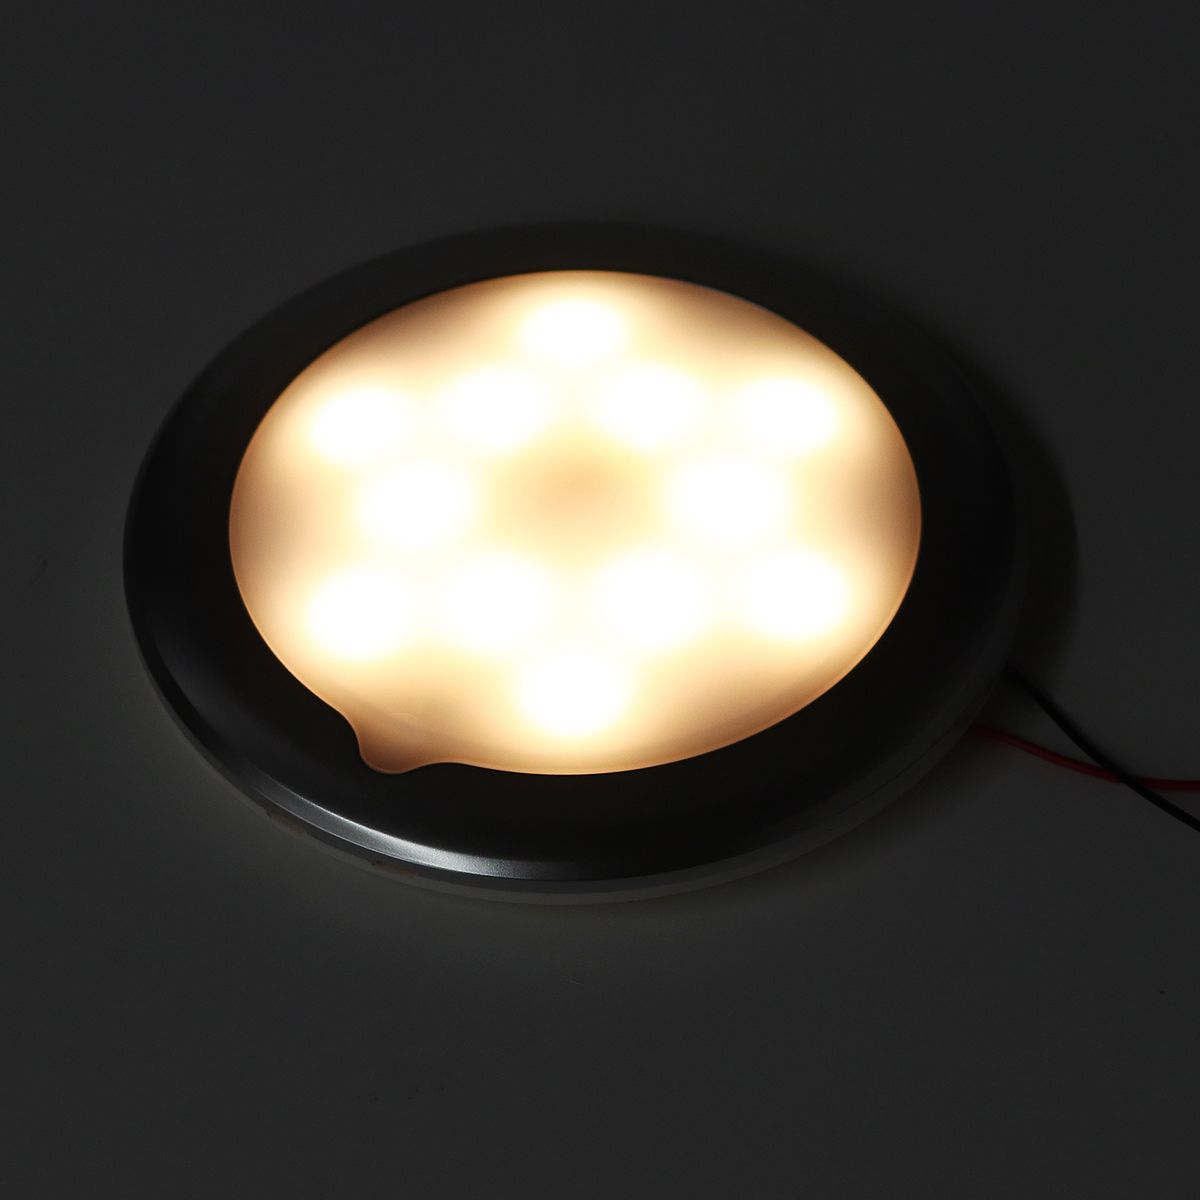 9-30V-LED-RV-Ceiling-Light-IP67-Waterproof-Lamp-with-Touch-Switch-for-CaravanTruckRVBoat-1544867